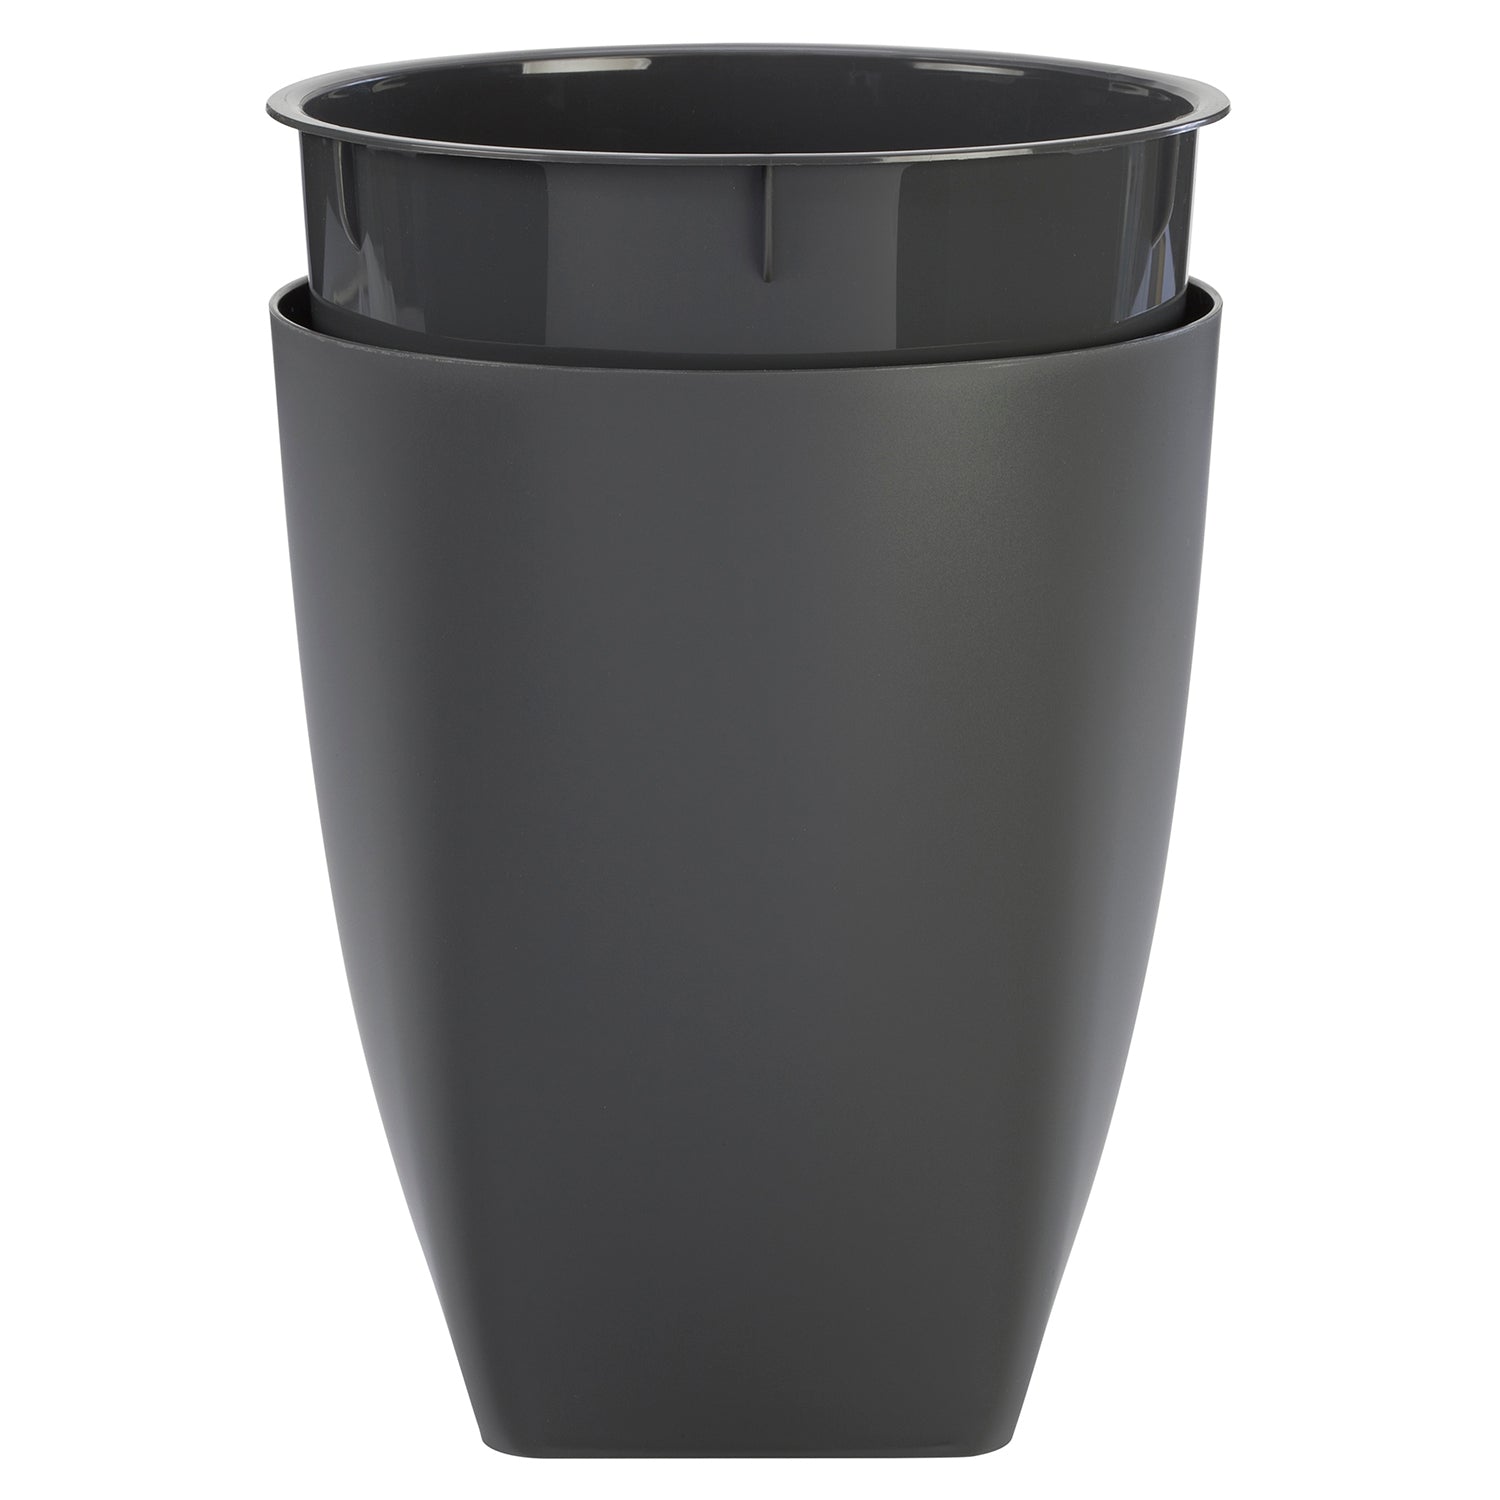 Ambrosia by Mike + Ally Scalloped Wastebasket & Liner 8.75x7x11.25 - agate/ Black Diamond